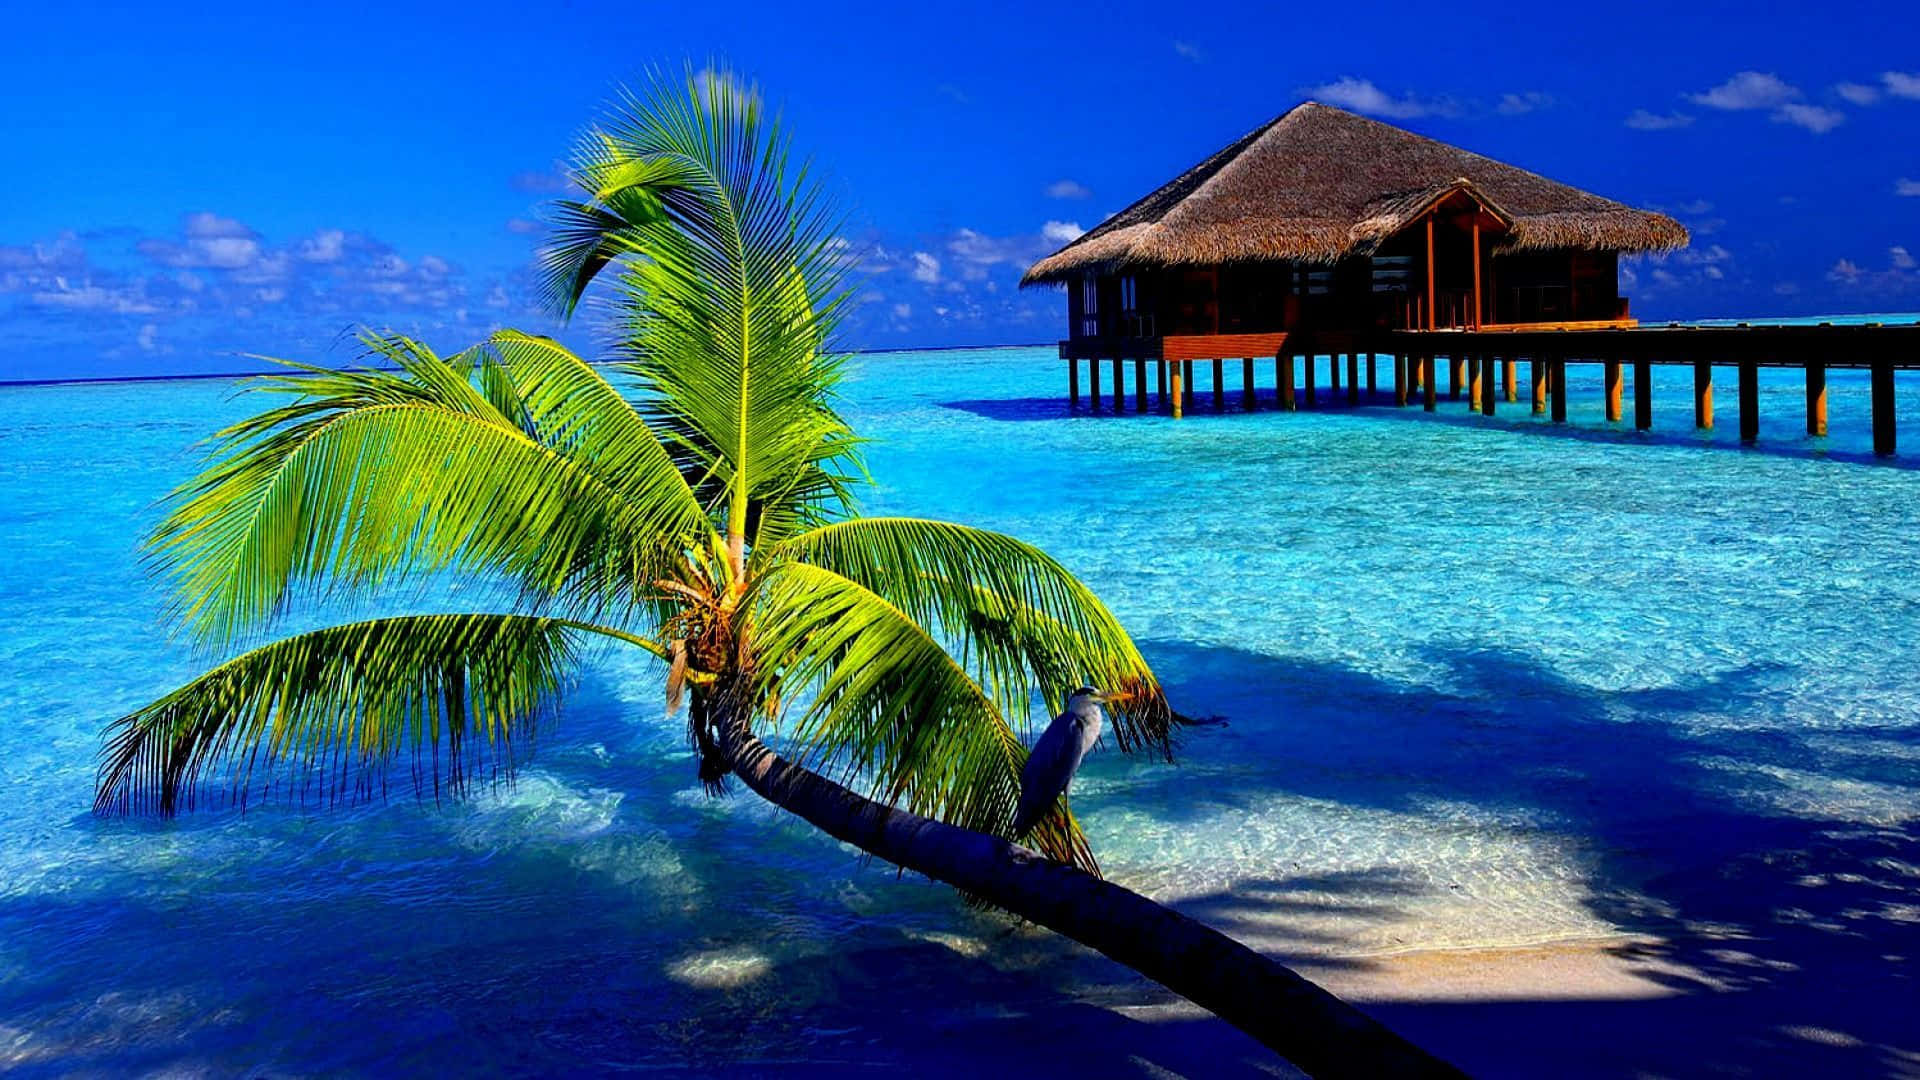 Soak in the sun and beauty of a tropical island paradise. Wallpaper